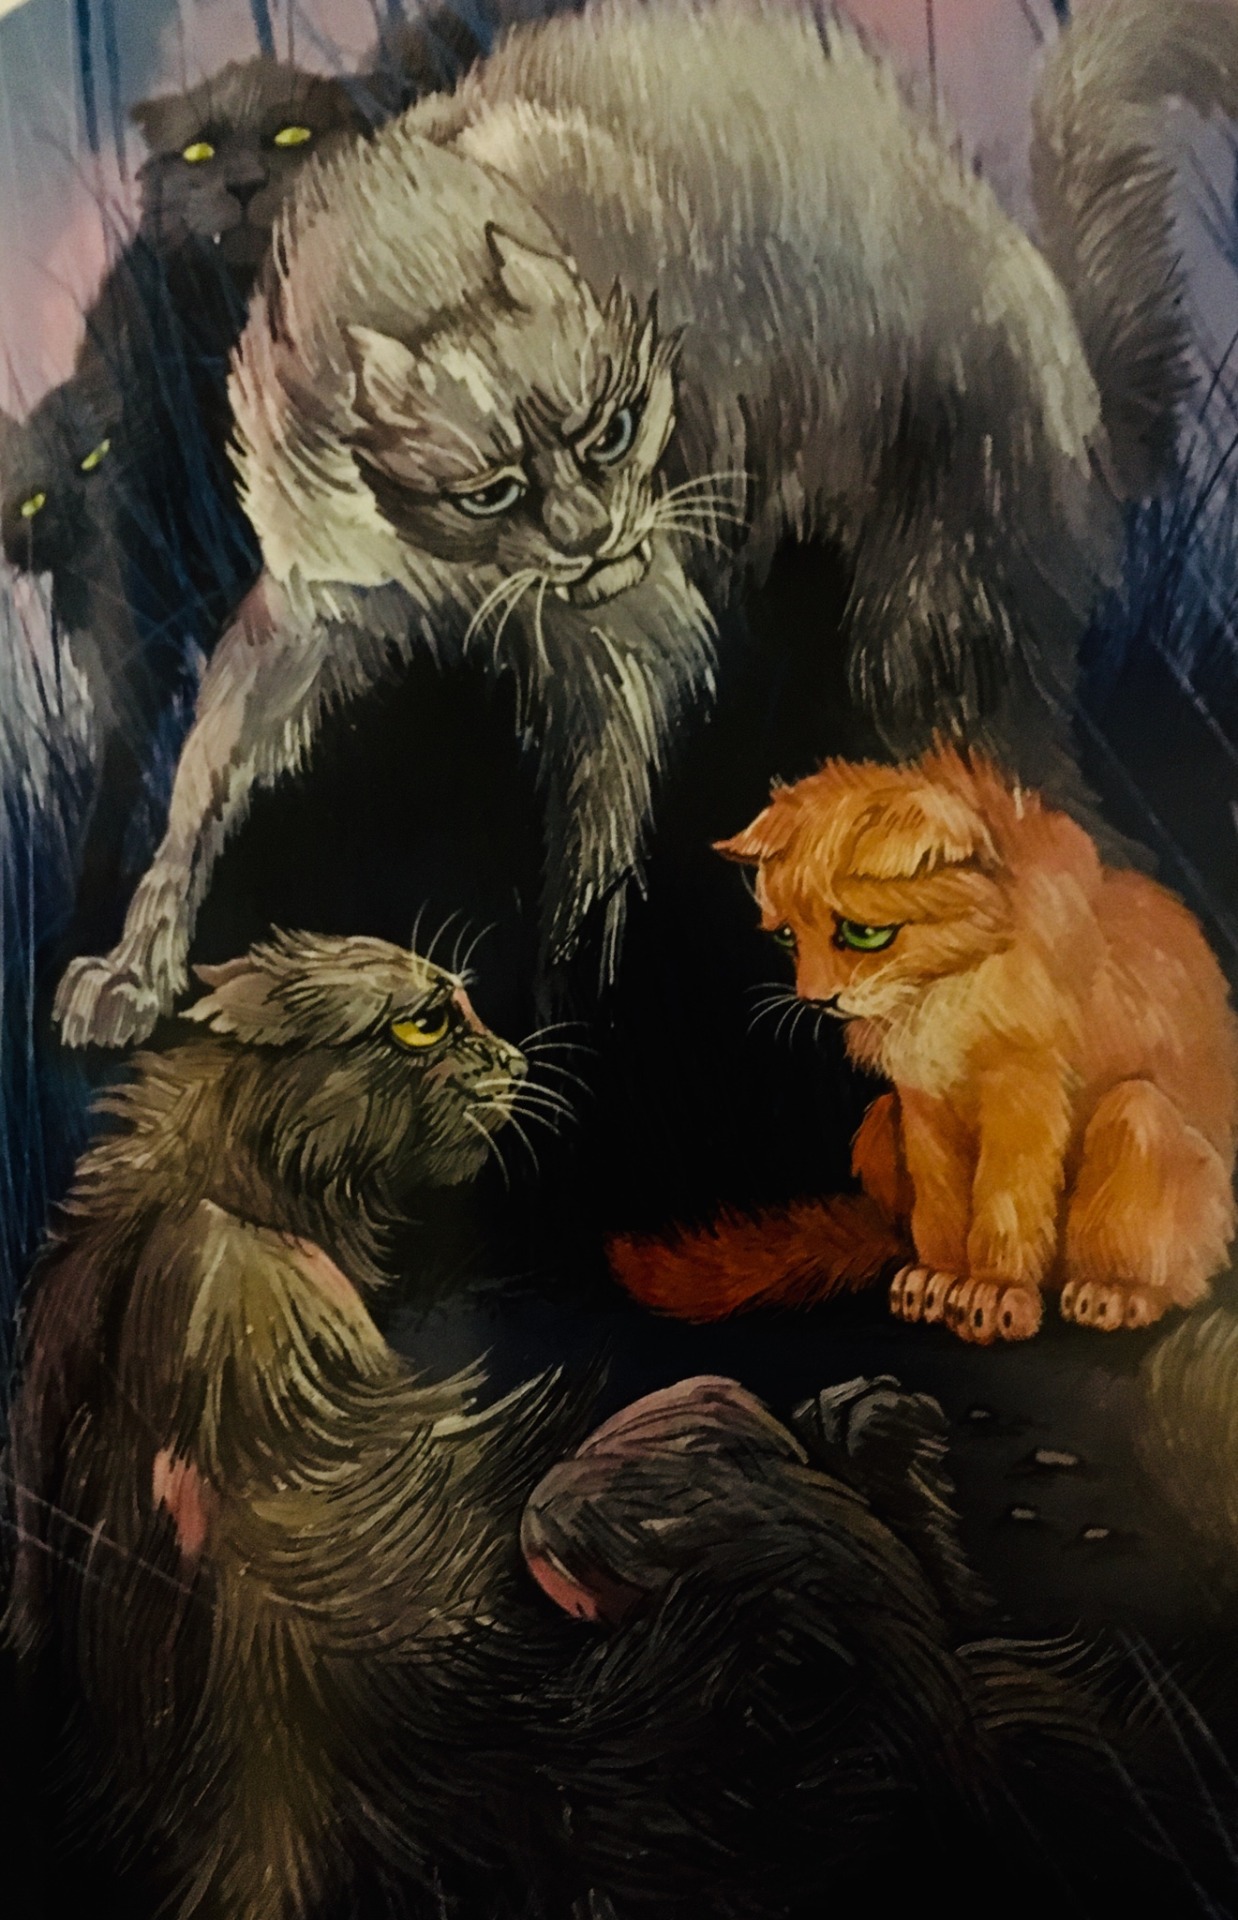 midnight's cave from the russian golden illustrations : r/WarriorCats